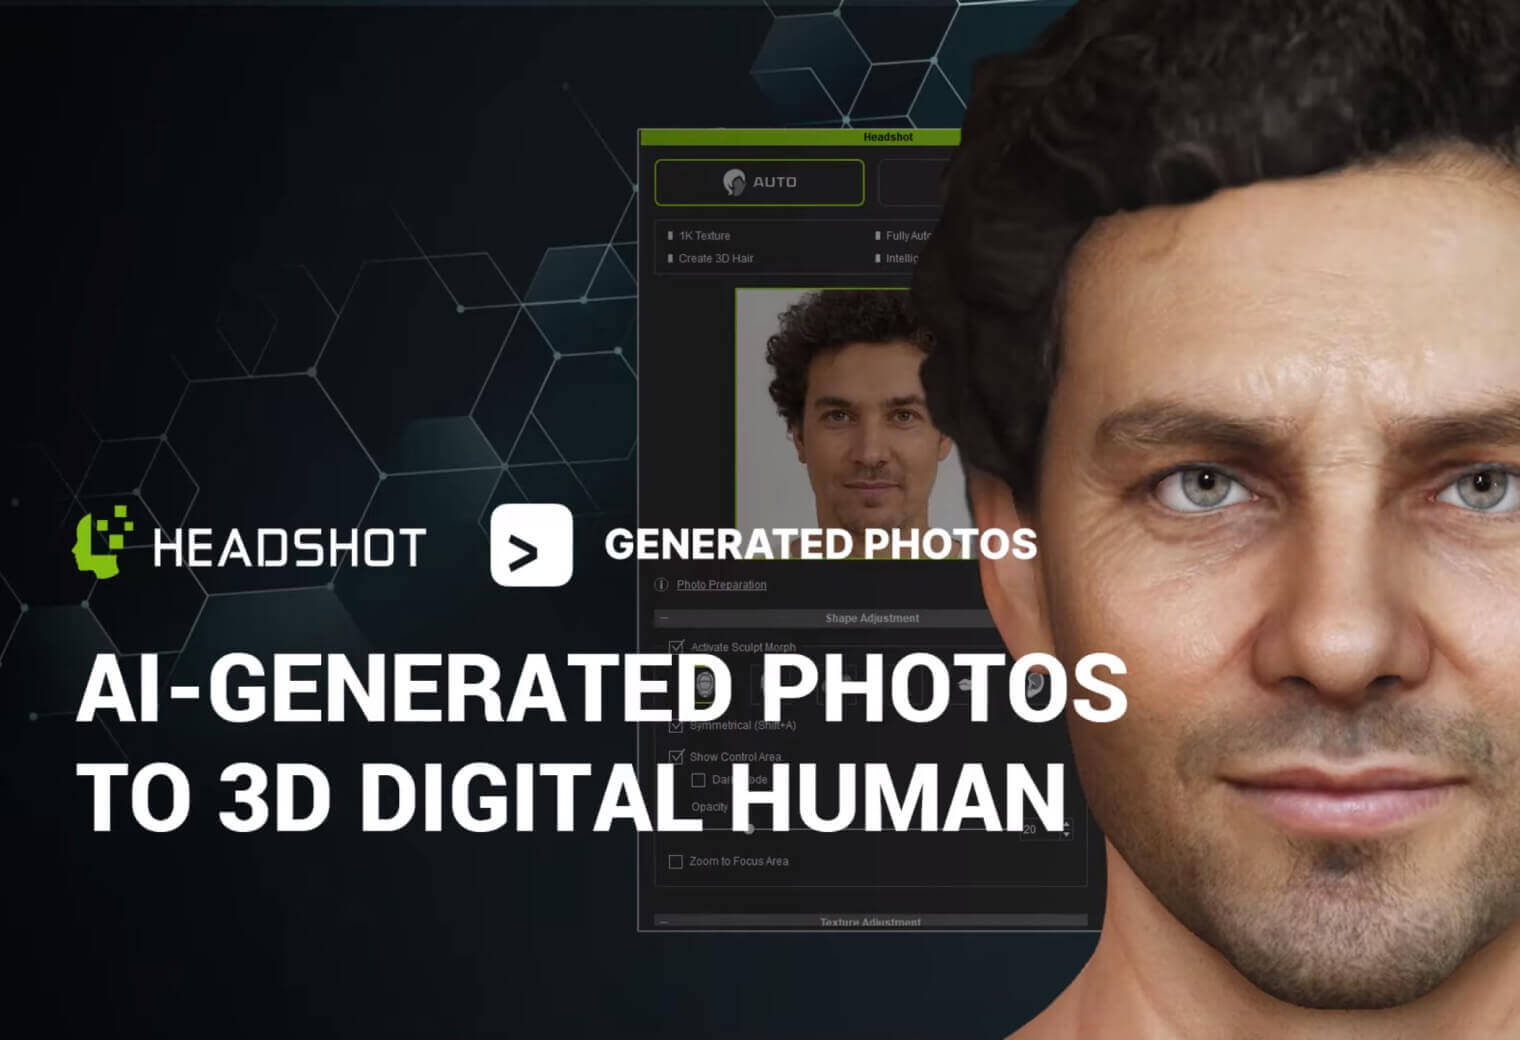 Generated Photos transformed into 3D animated humans using Reallusion's Character Creator